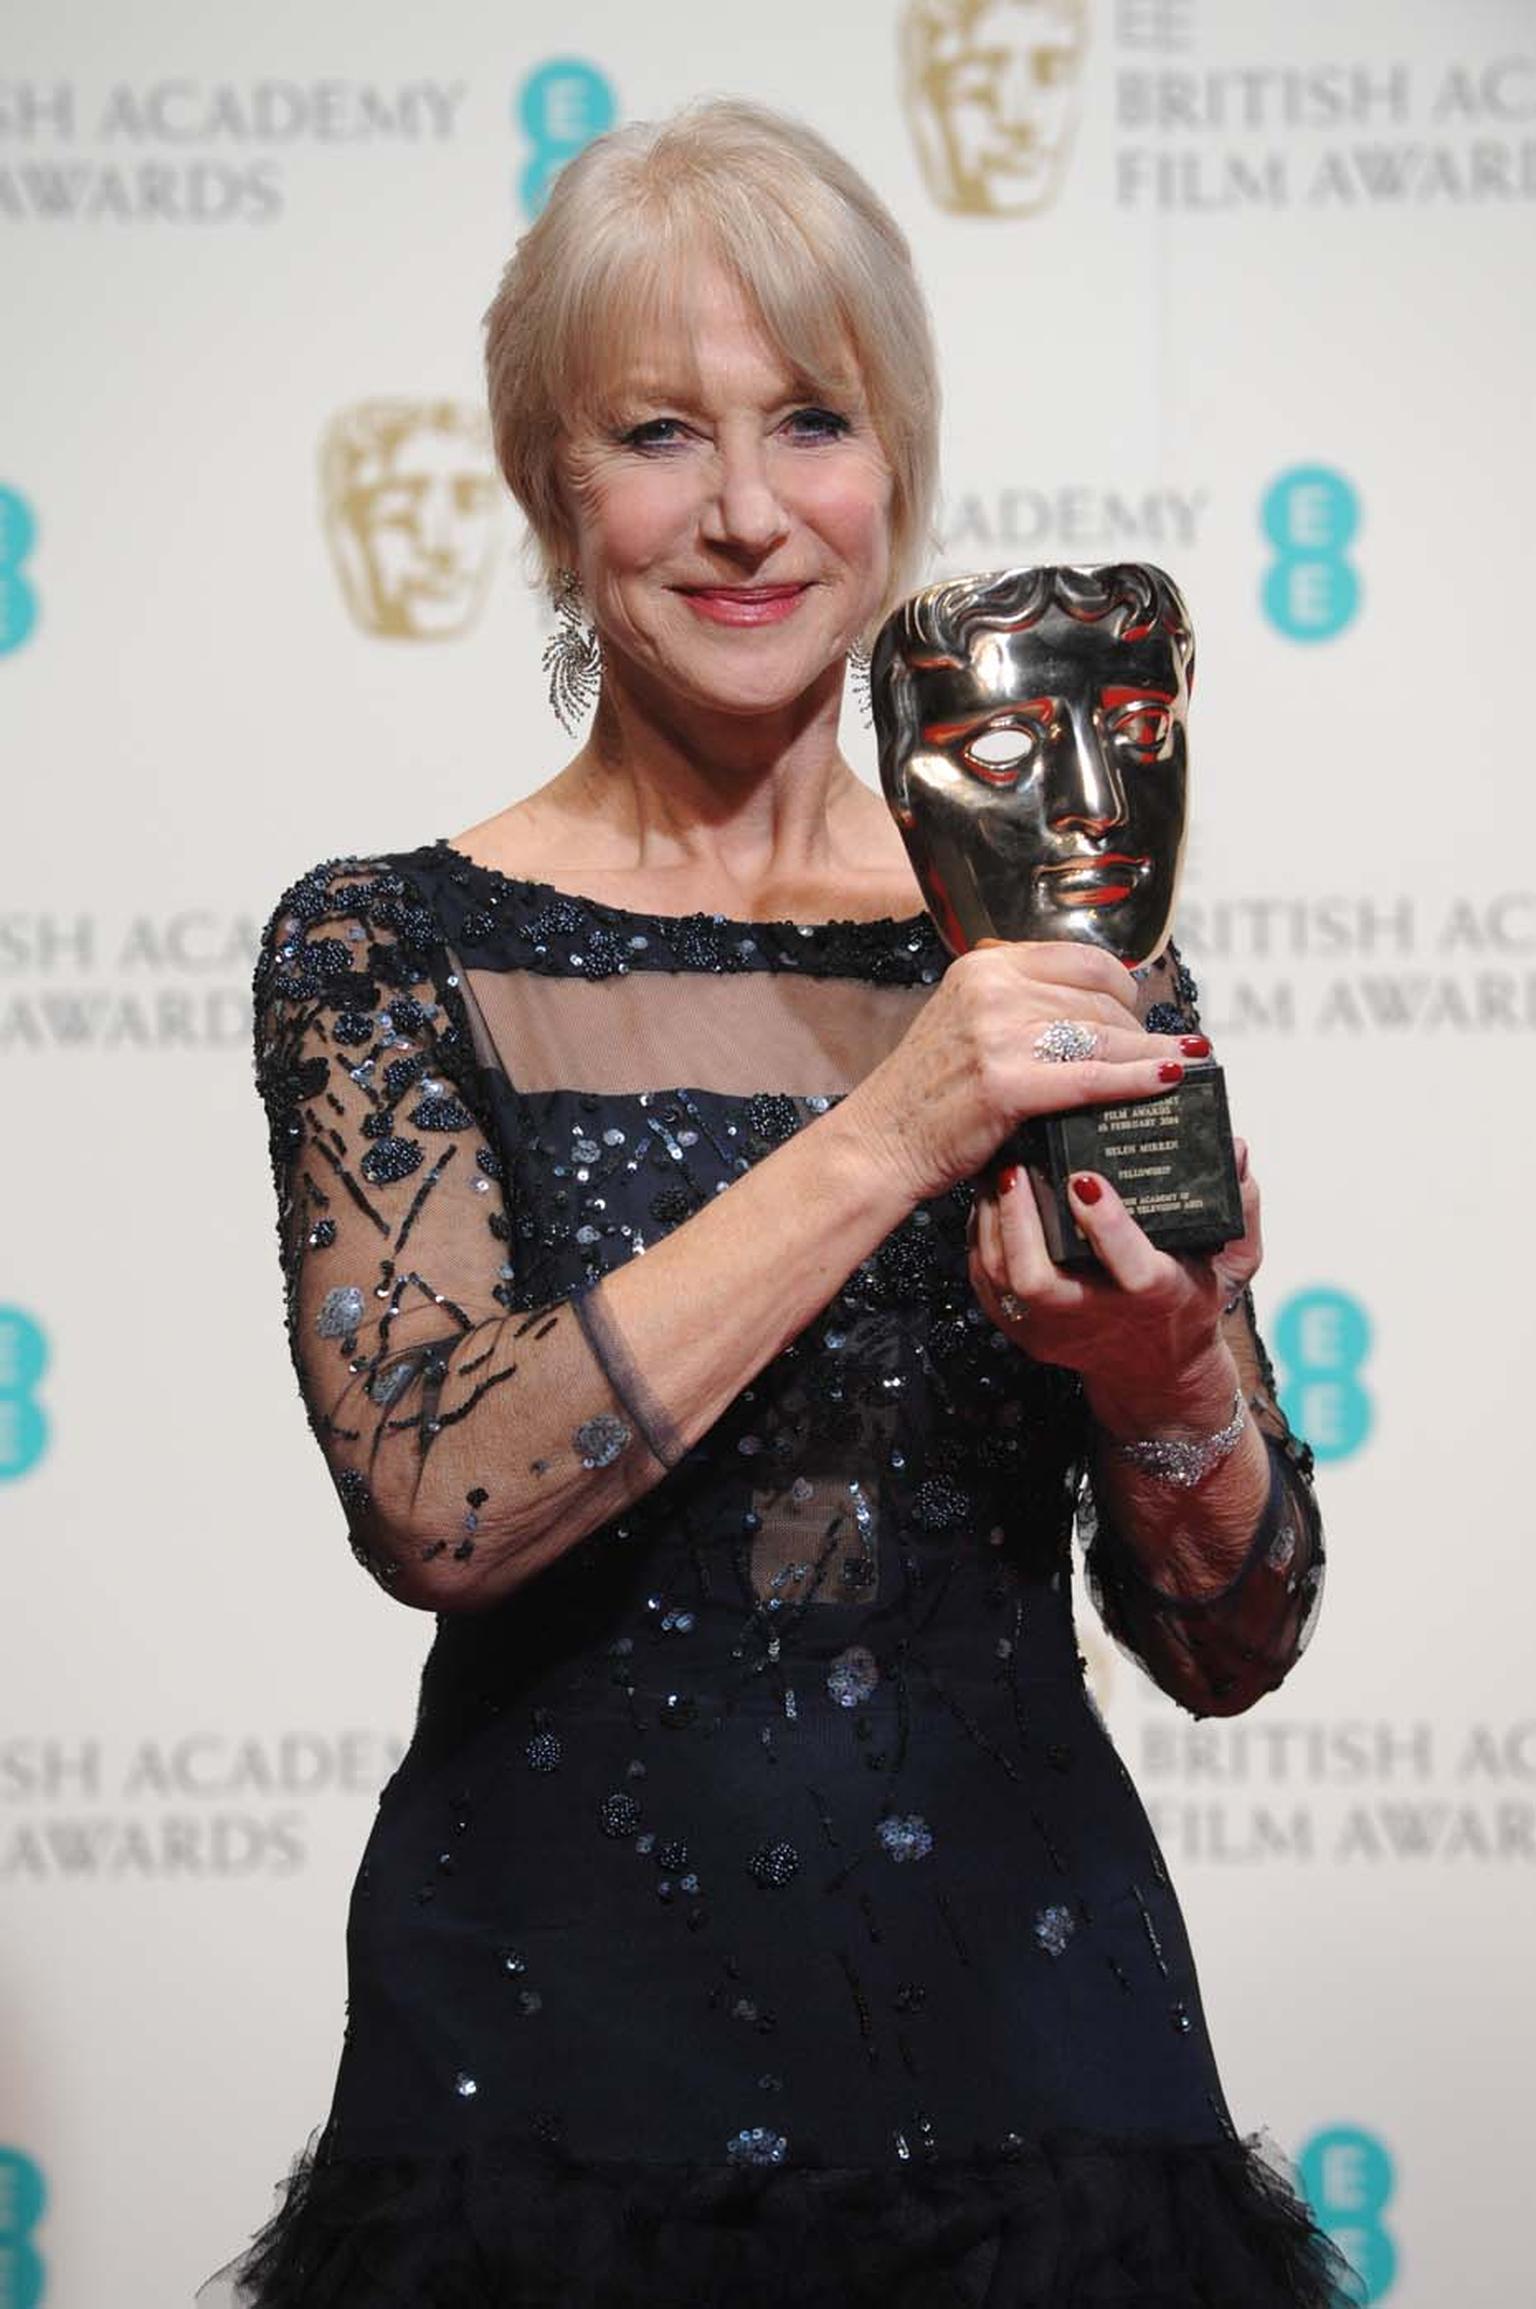 The Bafta fellowship for 2014 was awarded to Helen Mirren, who wore jewels from Asprey's new diamond Storm collection